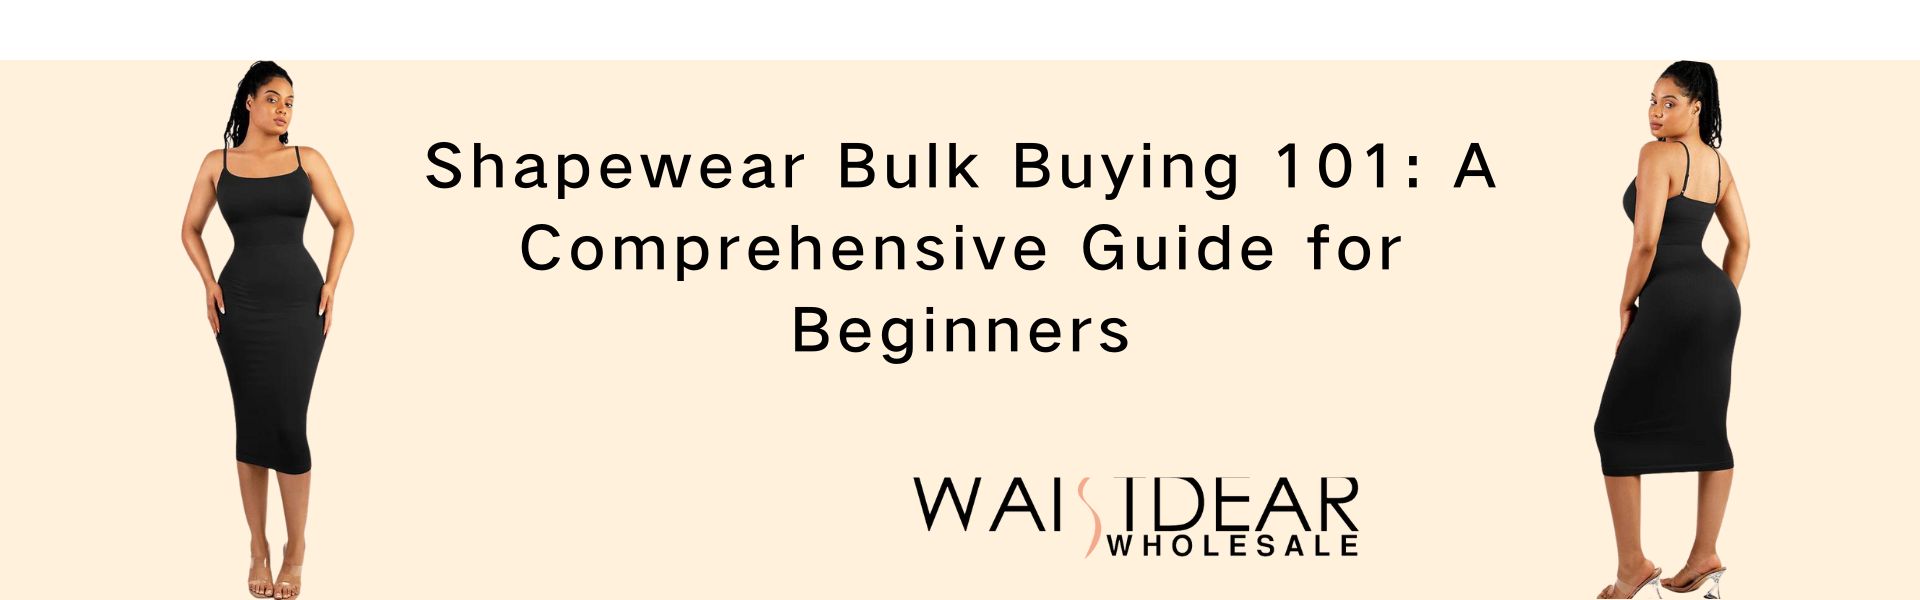 Shapewear Bulk Buying 101: A Comprehensive Guide for Beginners